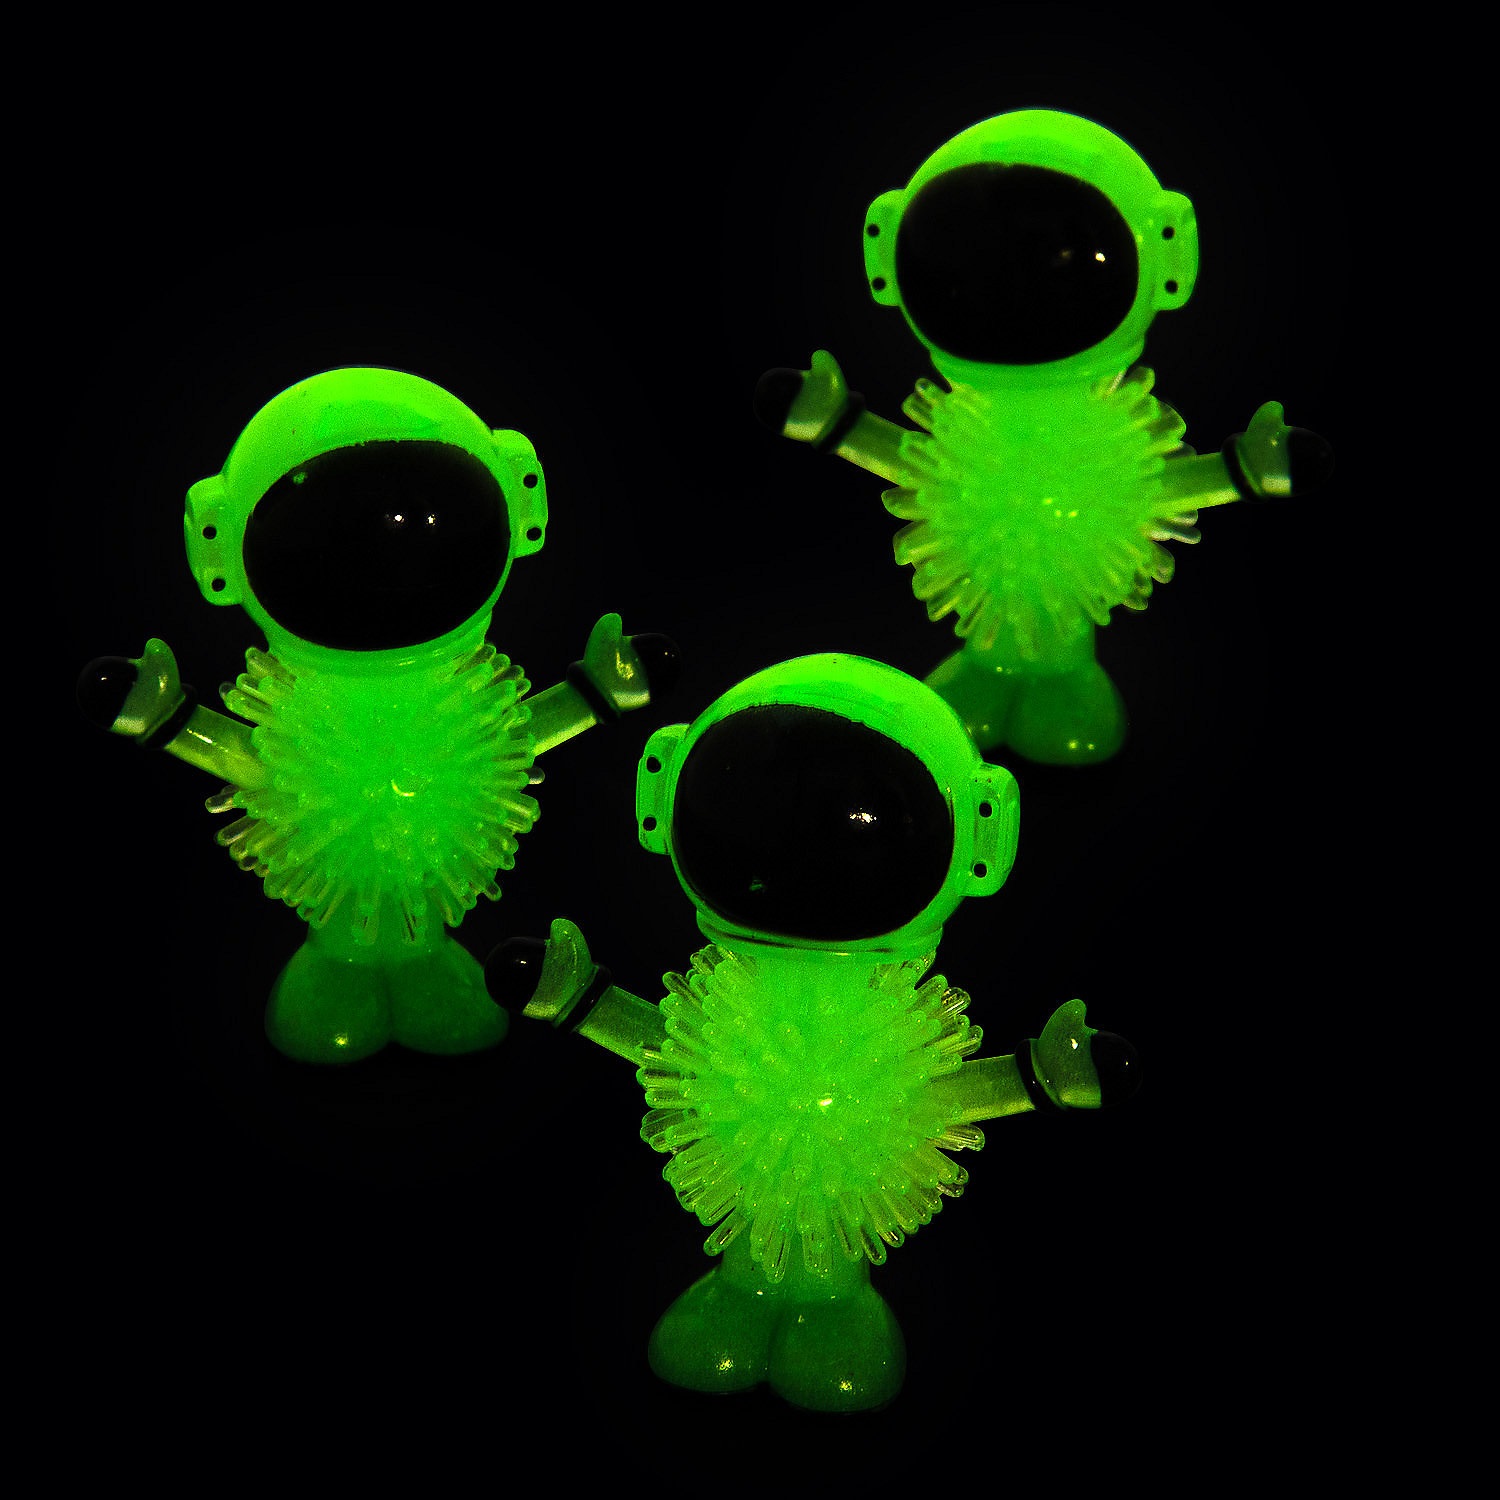 glow-in-the-dark-space-astronaut-porcupine-characters-12-pc-_13980610